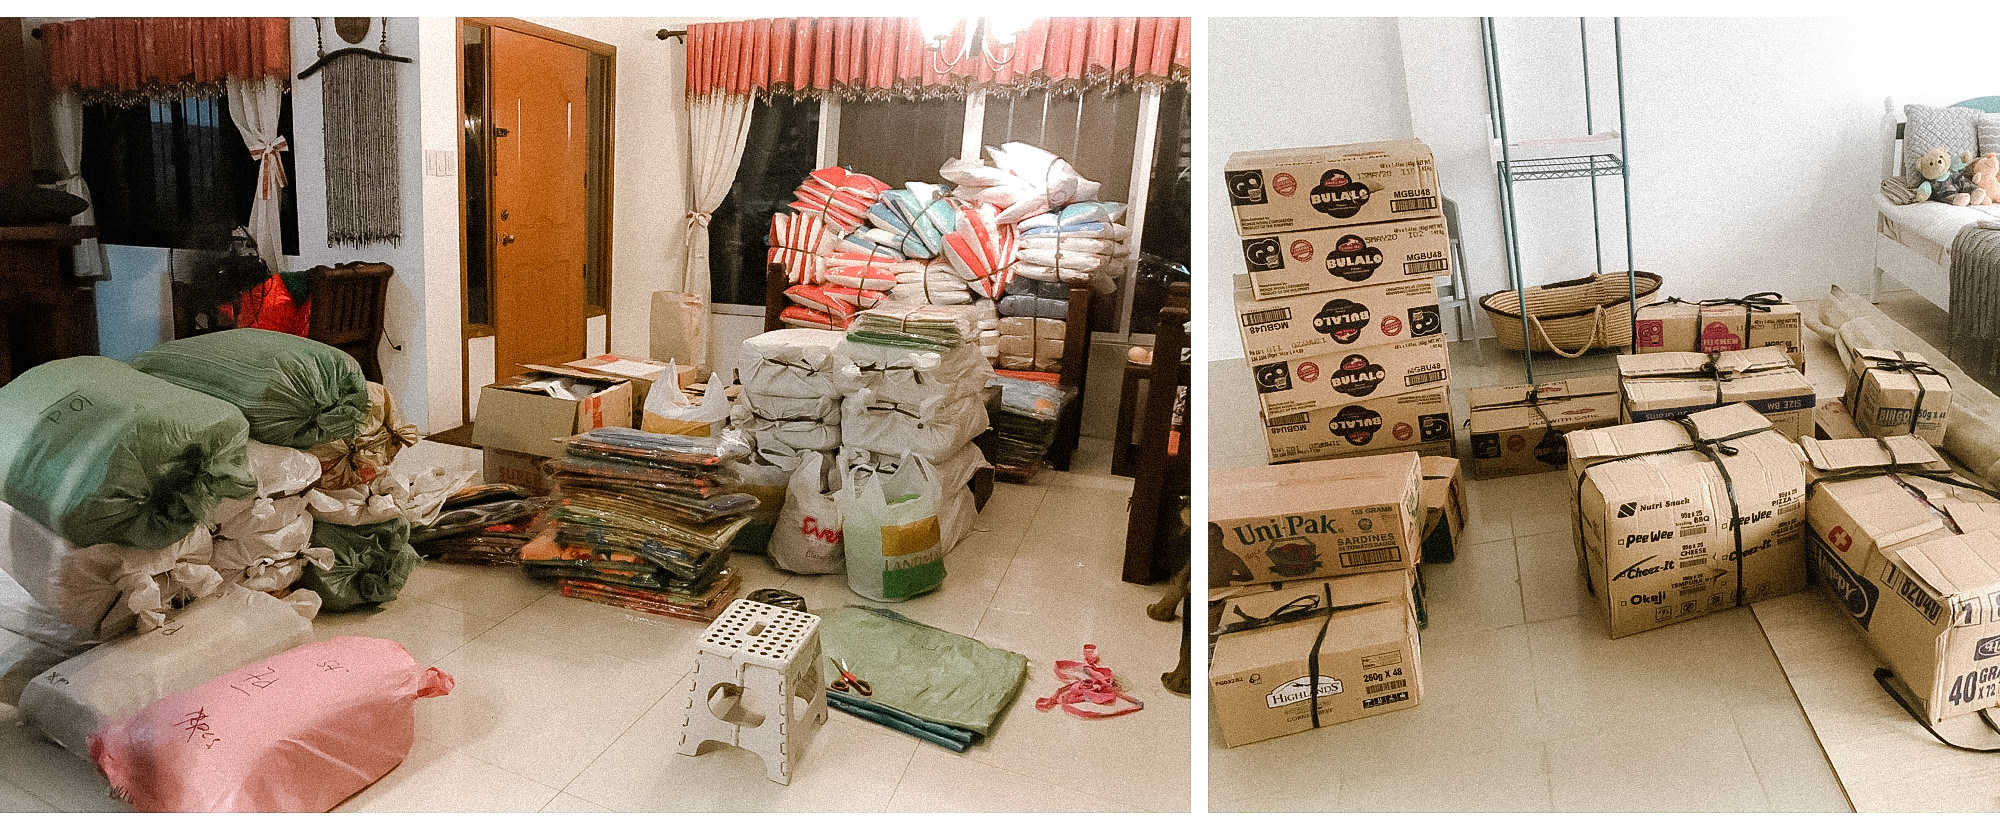 Lots of donations for Taal evacuees